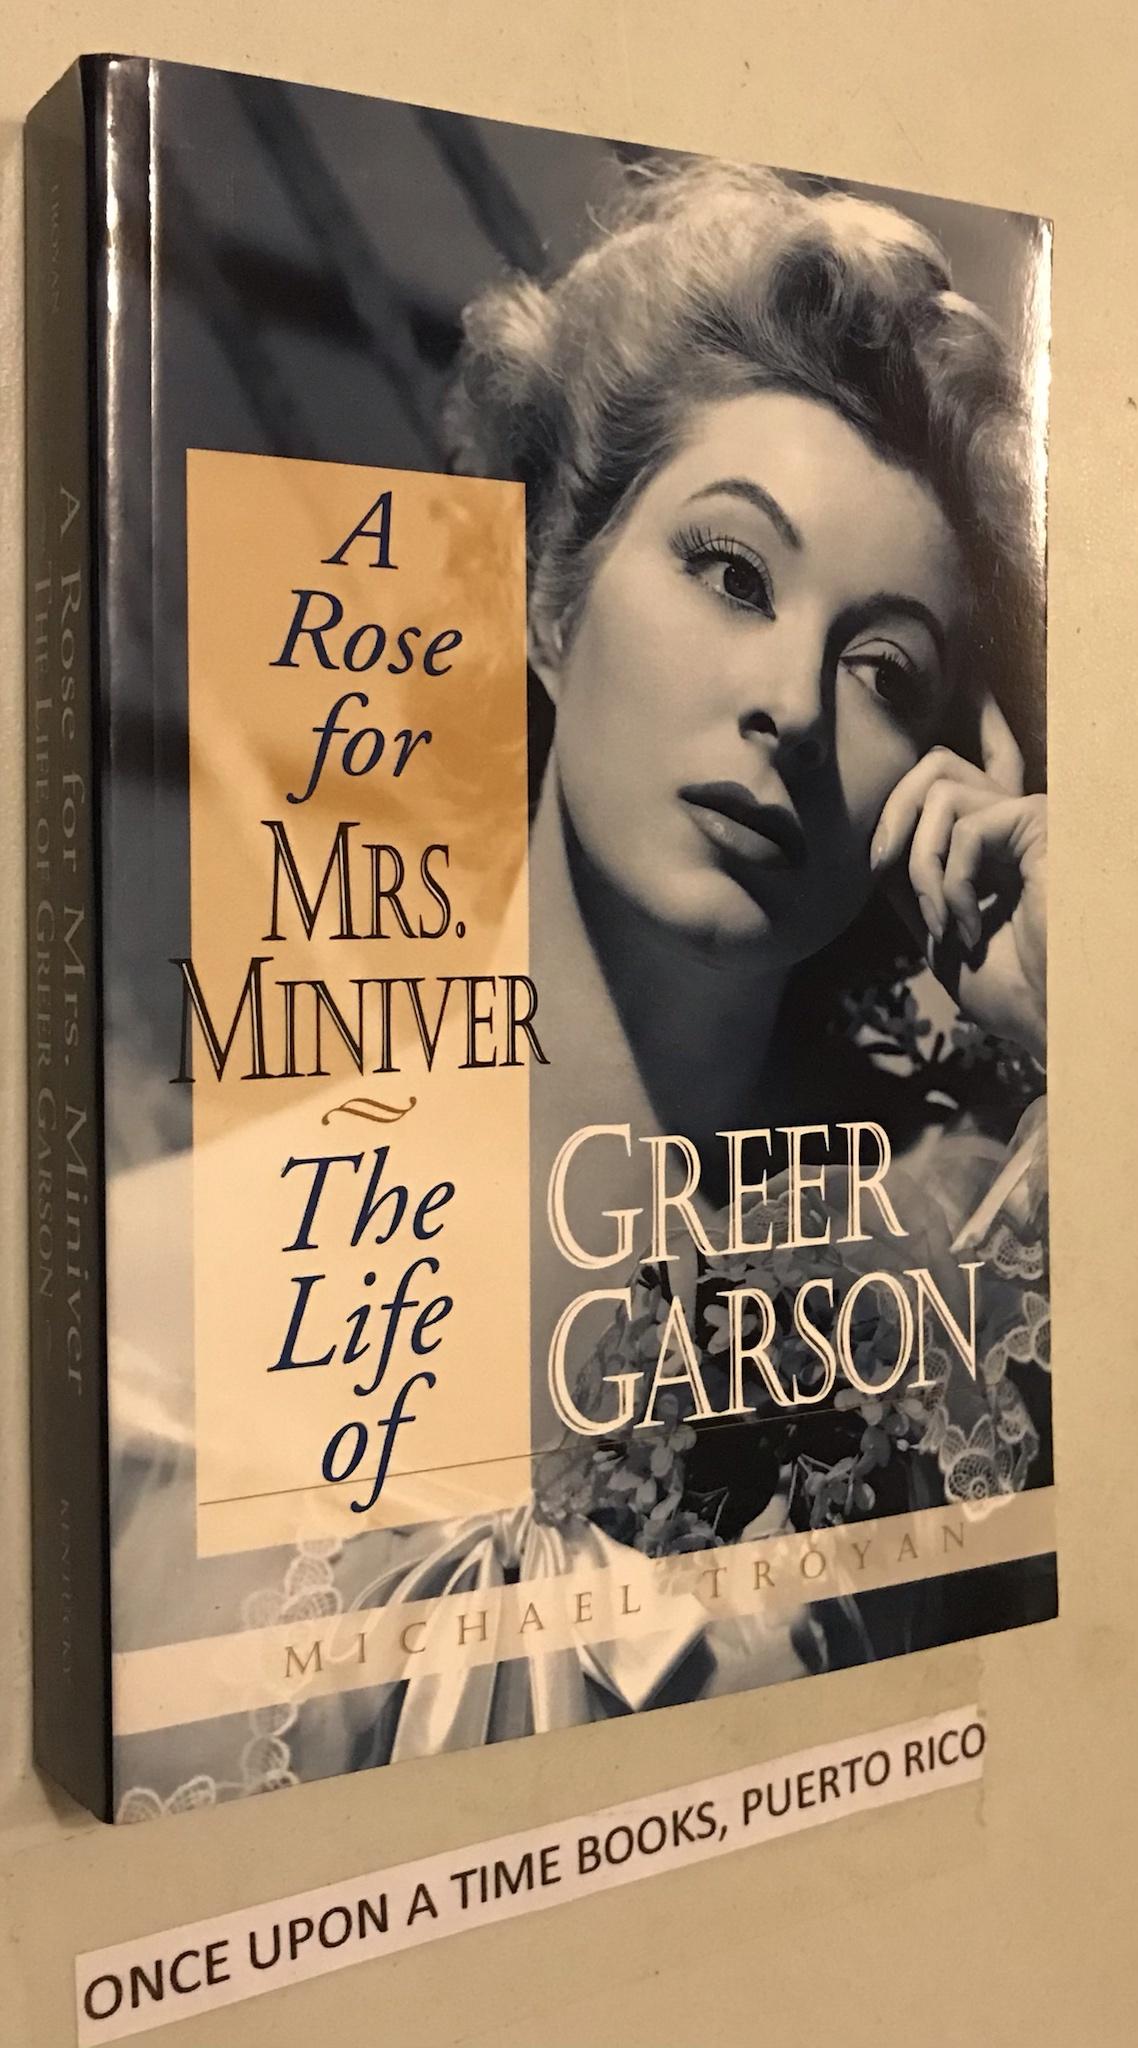 A Rose for Mrs. Miniver: The Life of Greer Garson - Troyan, Michael